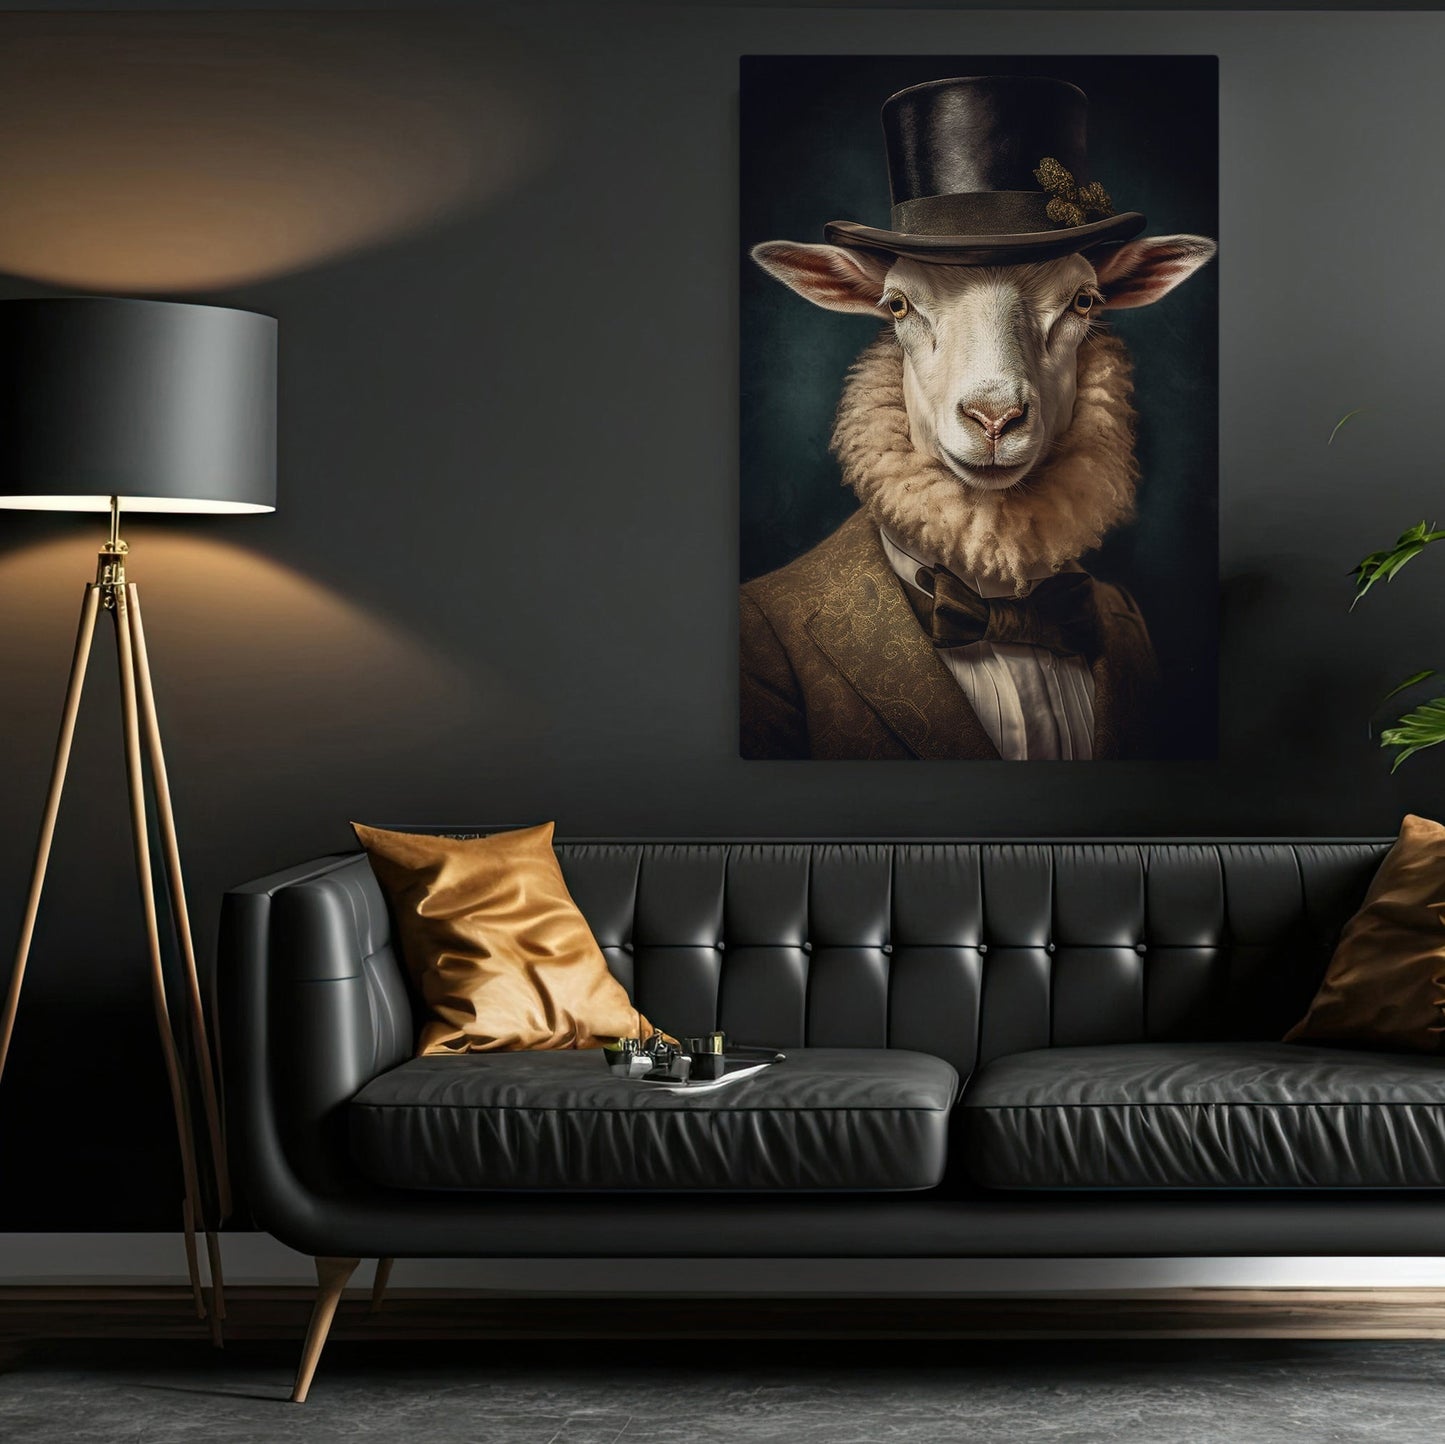 Goat In Victorian Suit, Victorian Goat Canvas Painting, Victorian Animal Wall Art Decor, Poster Gift For Goat Lovers